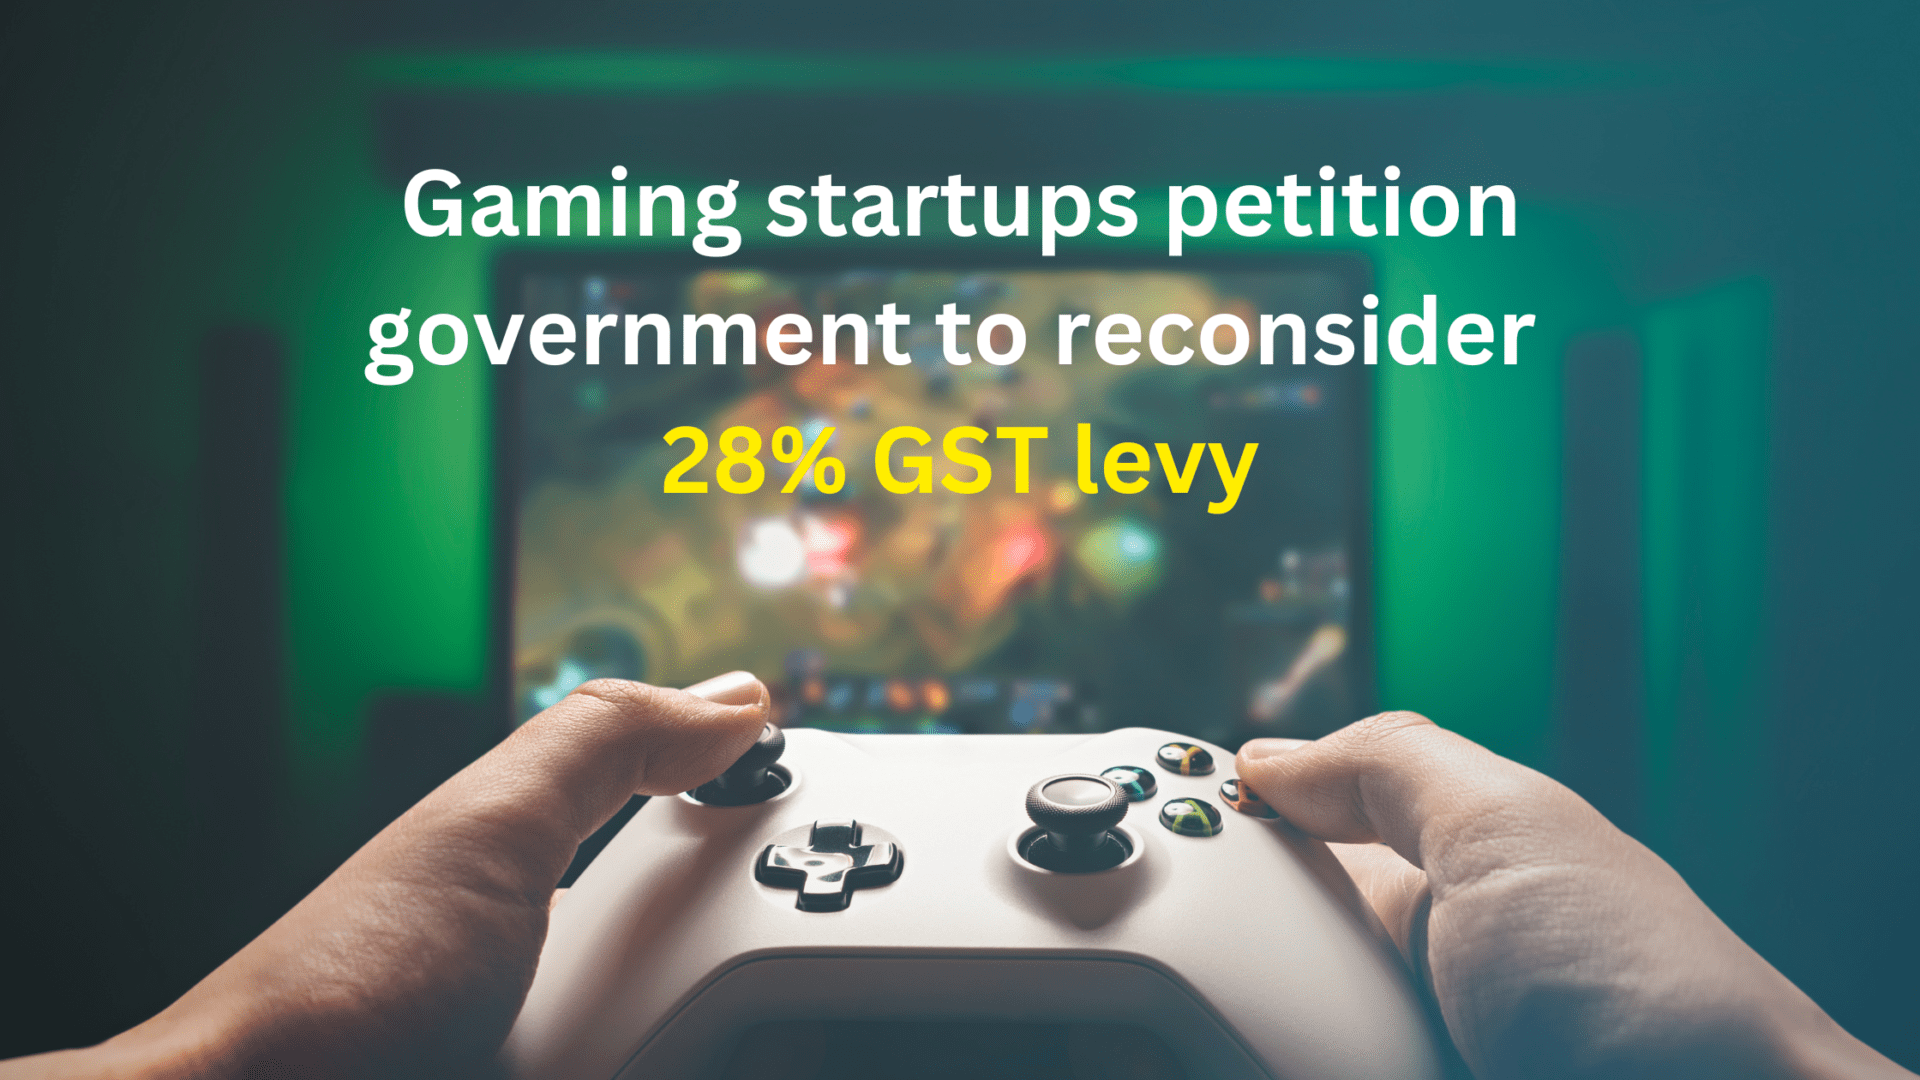 Gaming startups petition government to reconsider 28% GST levy